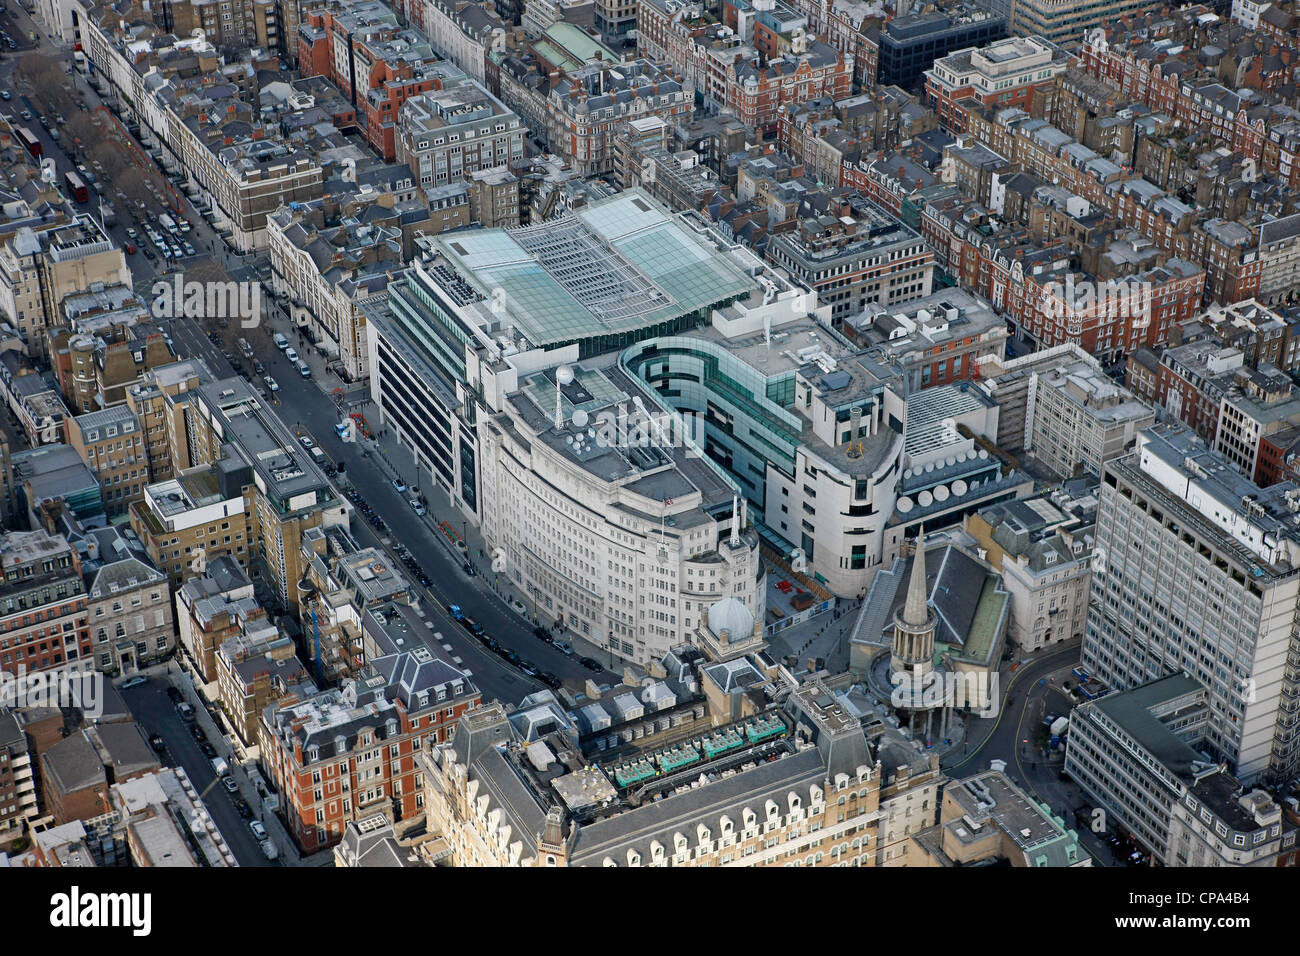 Aerial Image of the BBC radio building in London Stock Photo